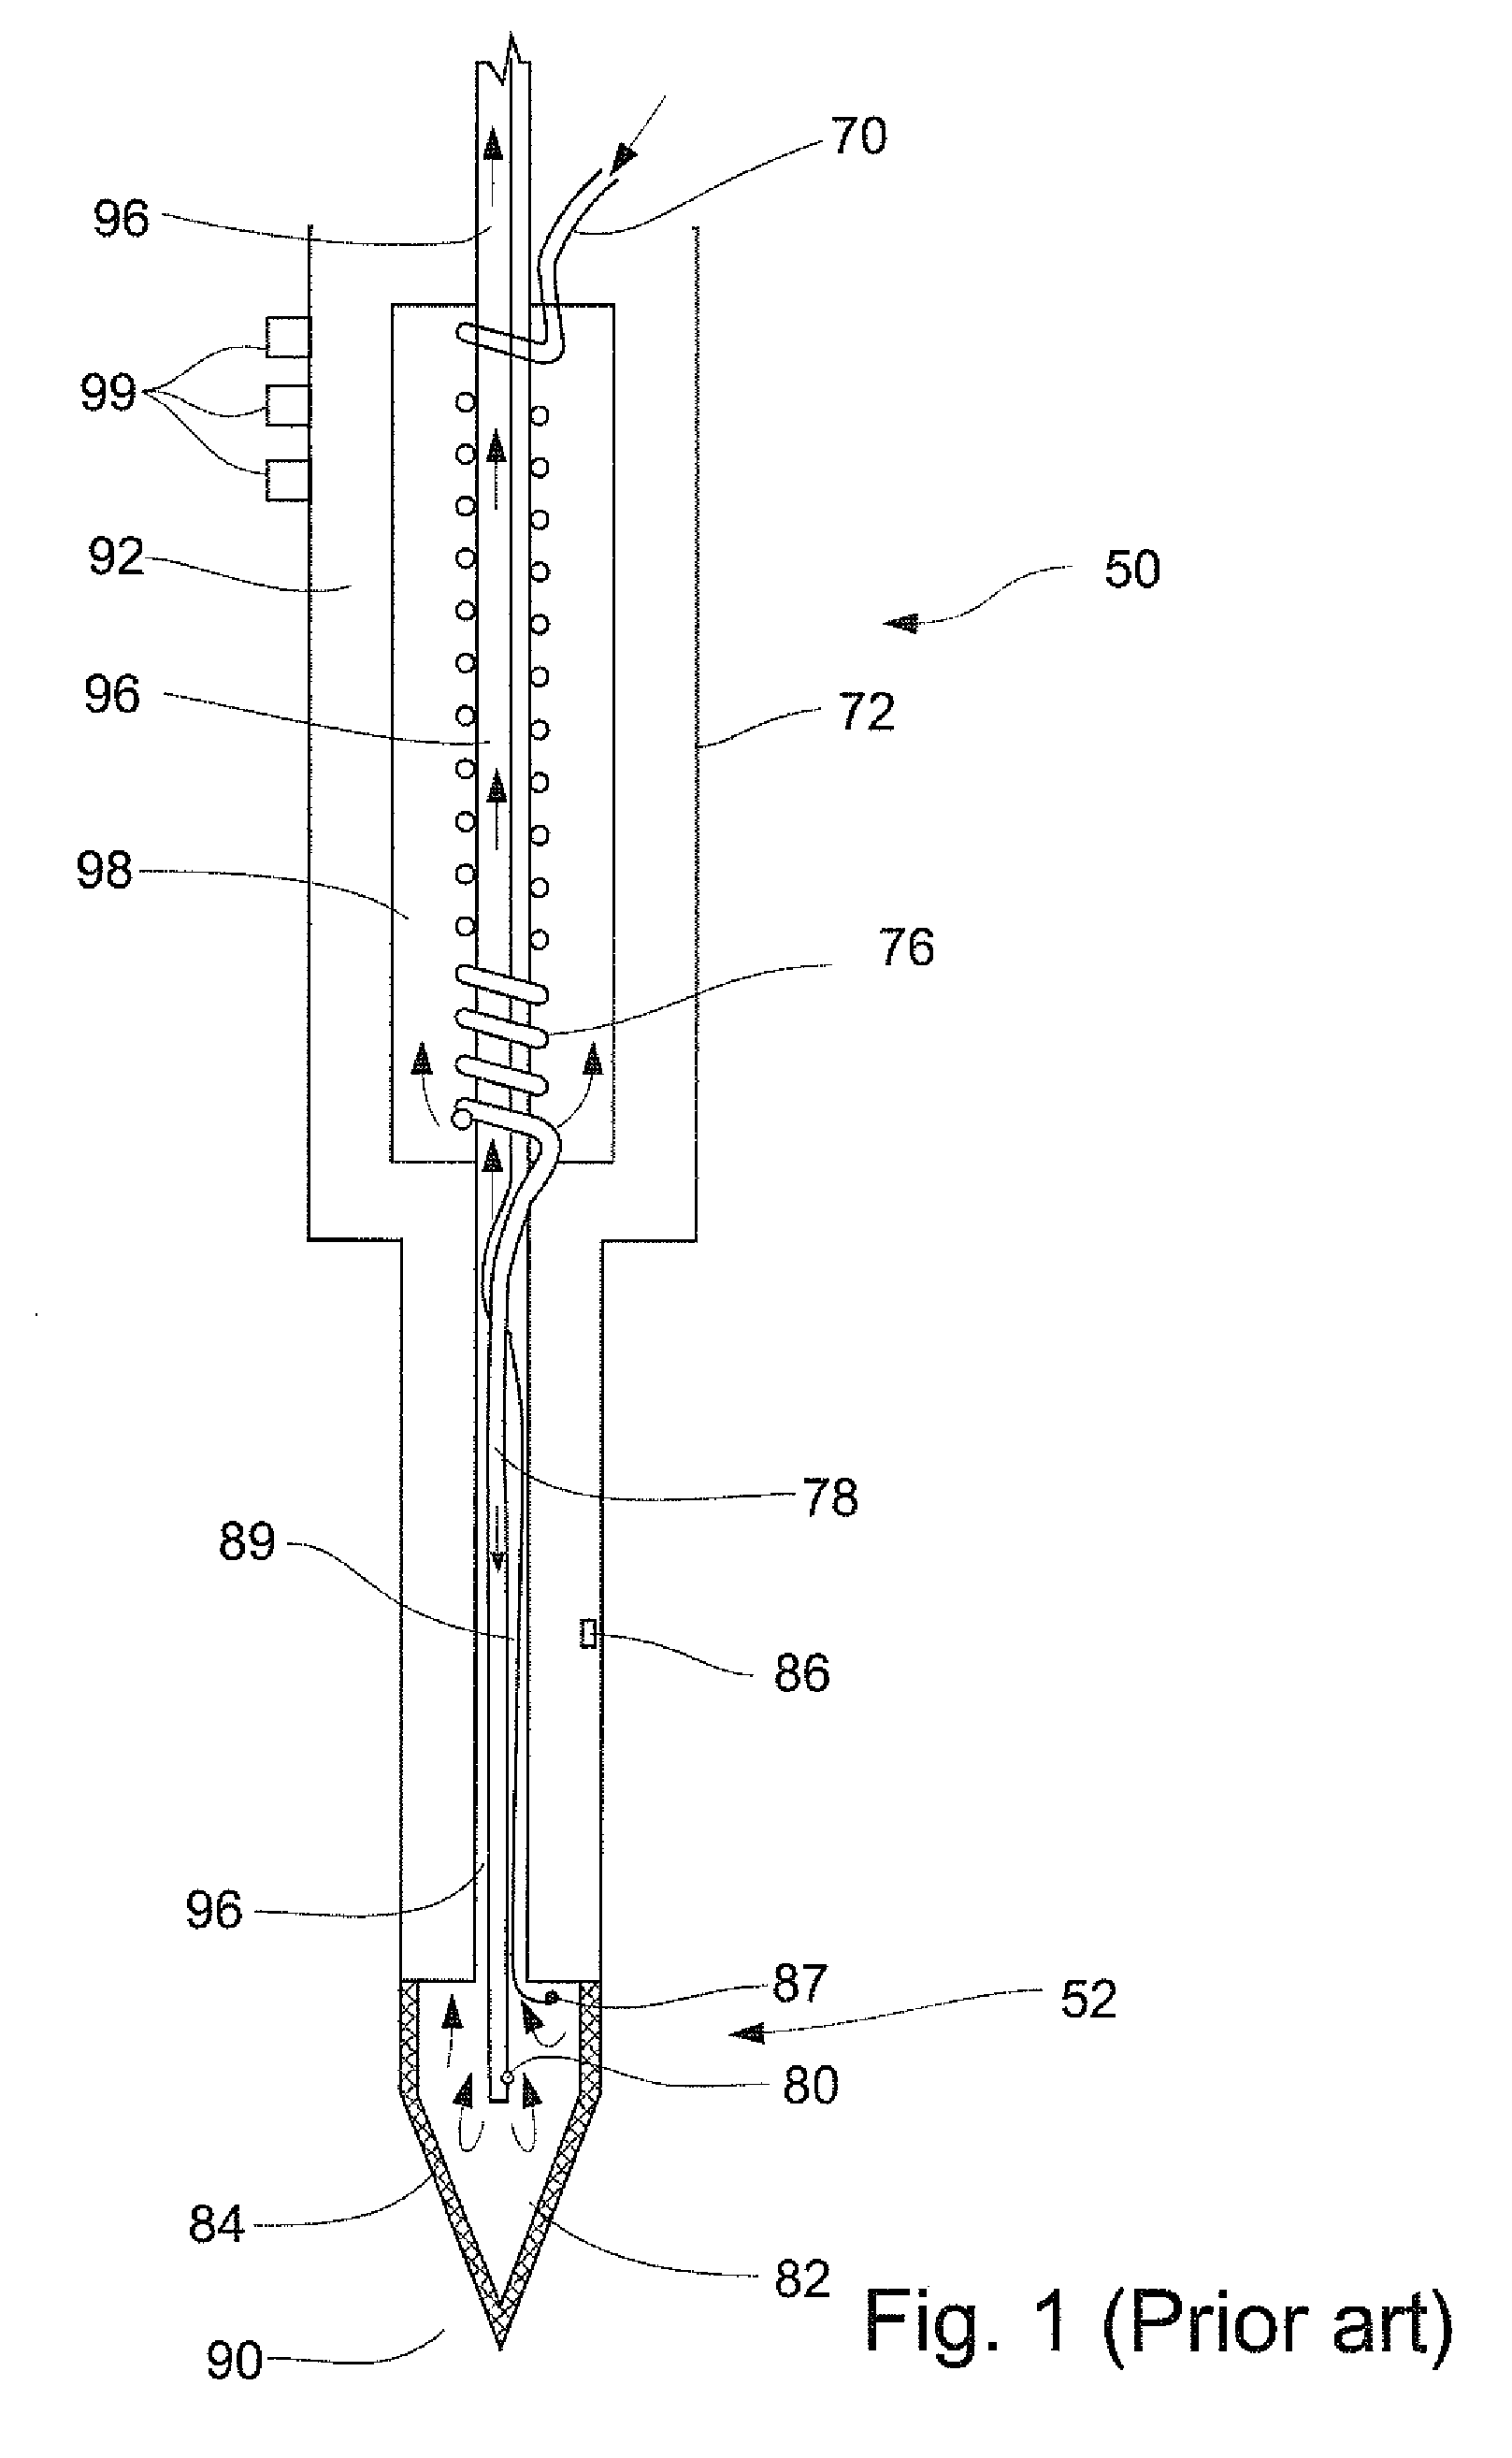 Apparatus and method for protecting tissues during cryoablation